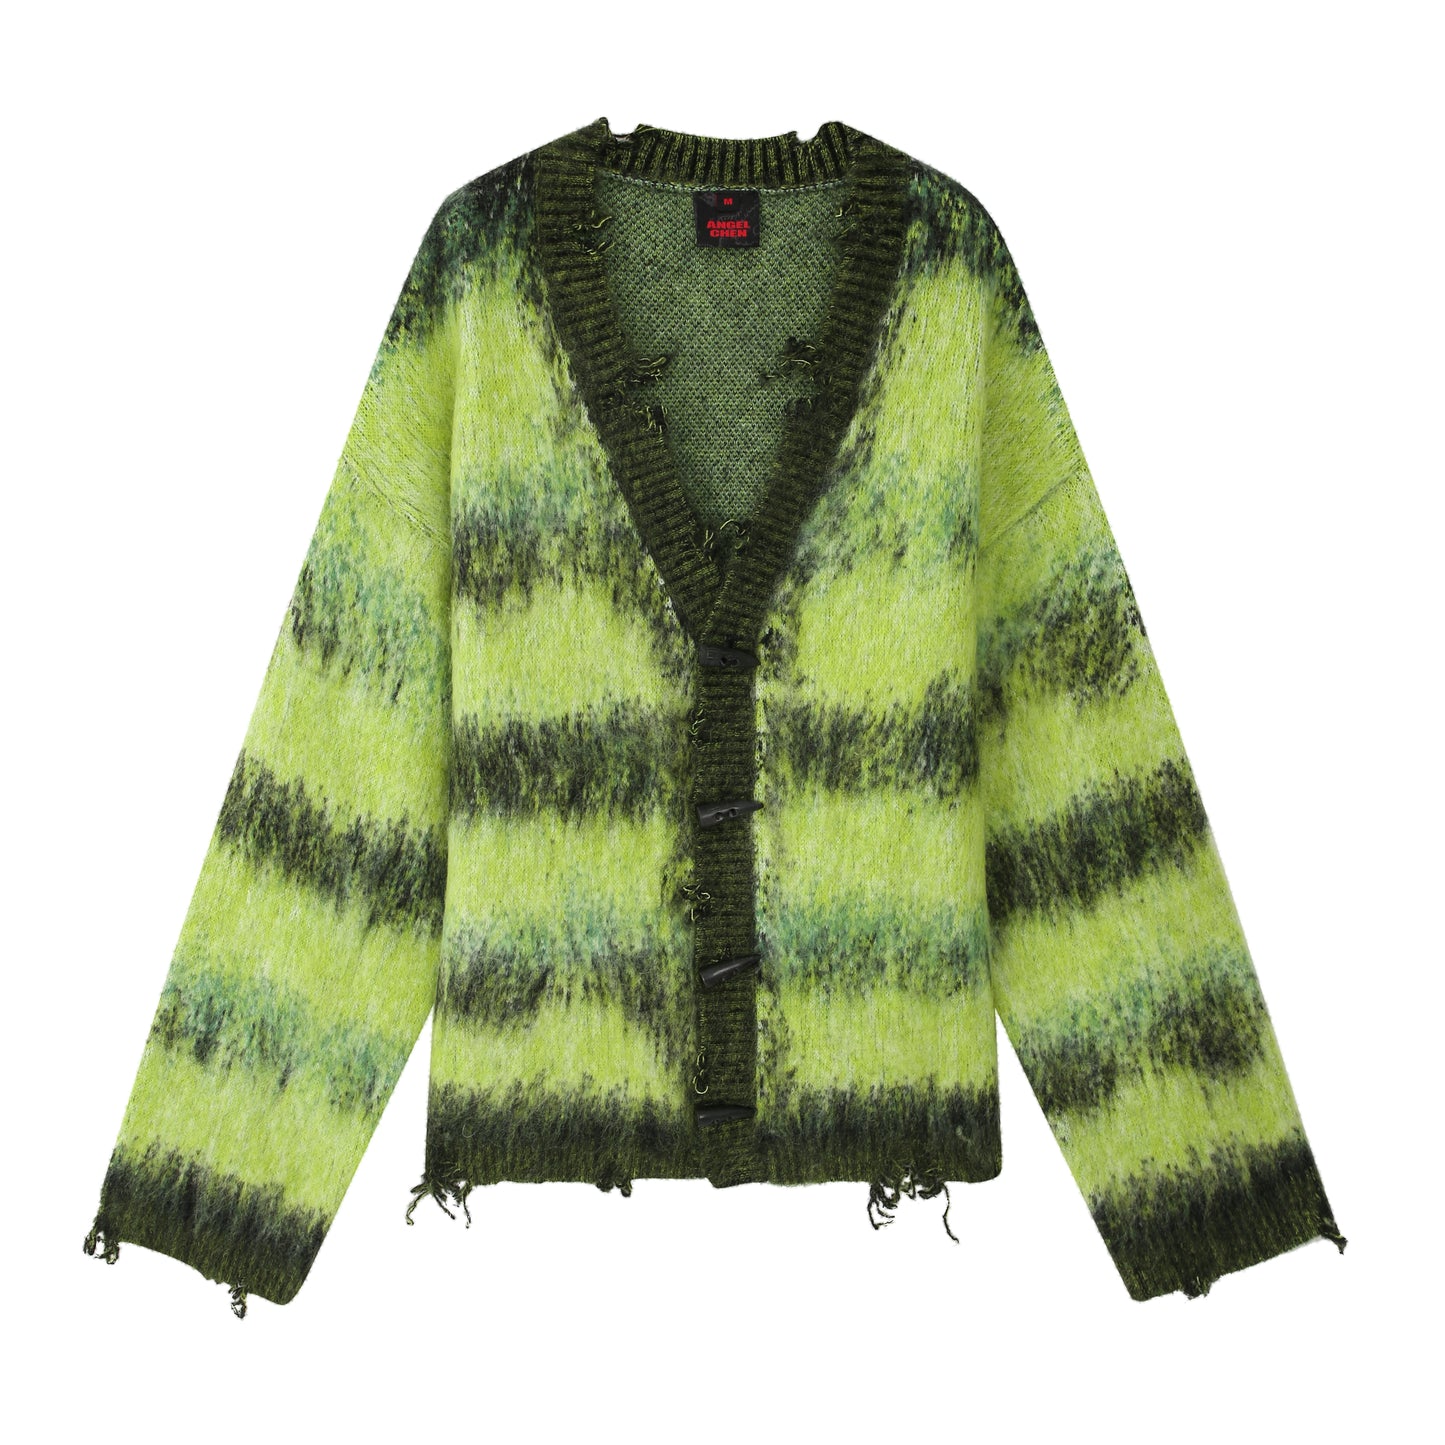 LIME DISTRESSED CARDIGAN FOR HIM